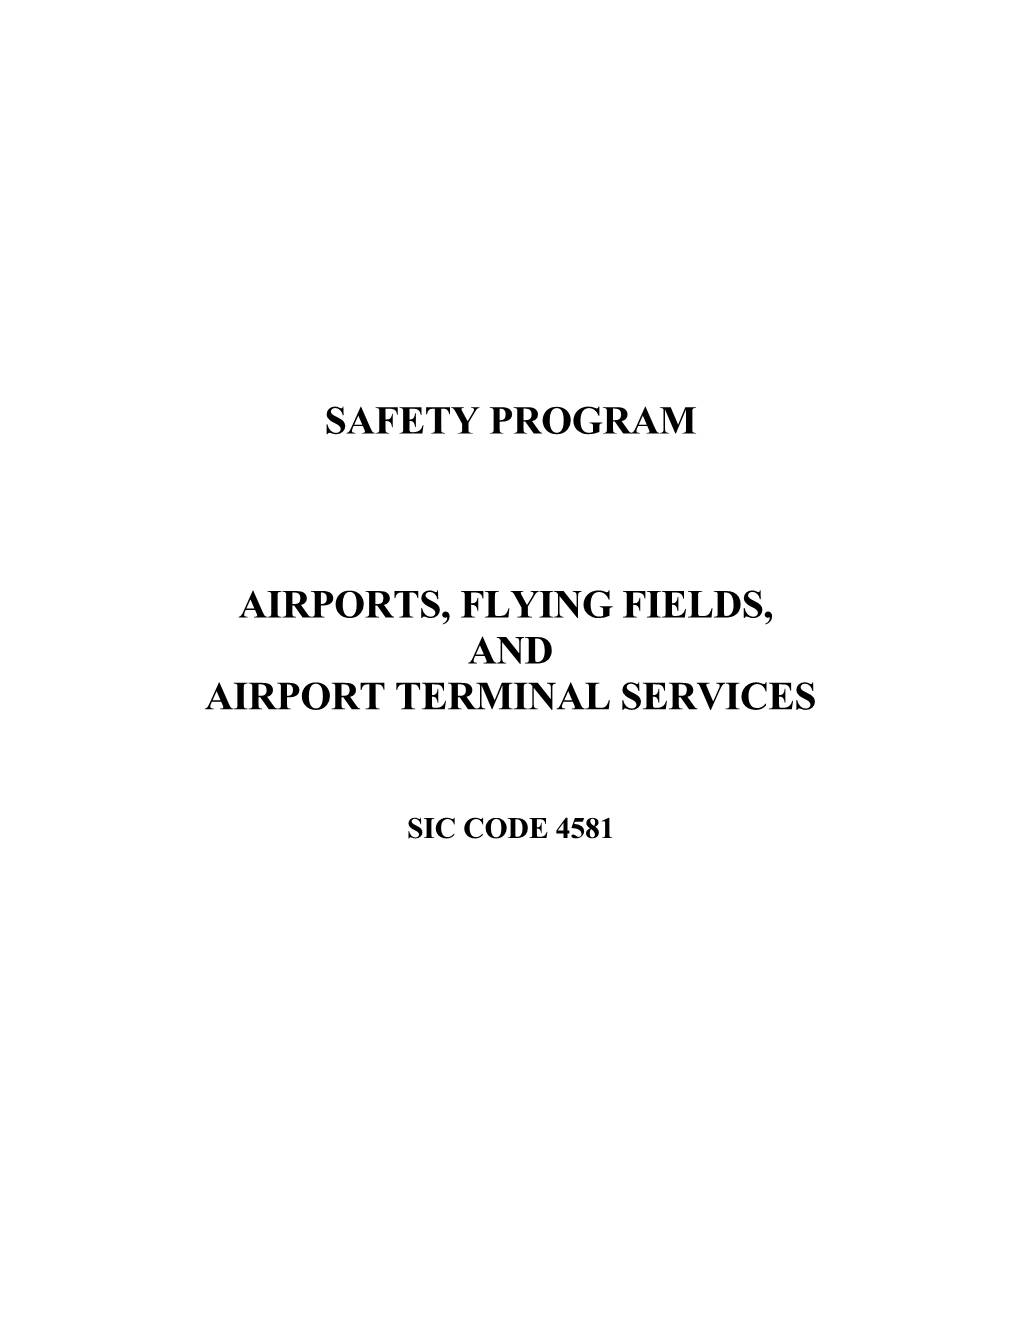 Airports, Flying Fields and Airport Terminal Safety Program